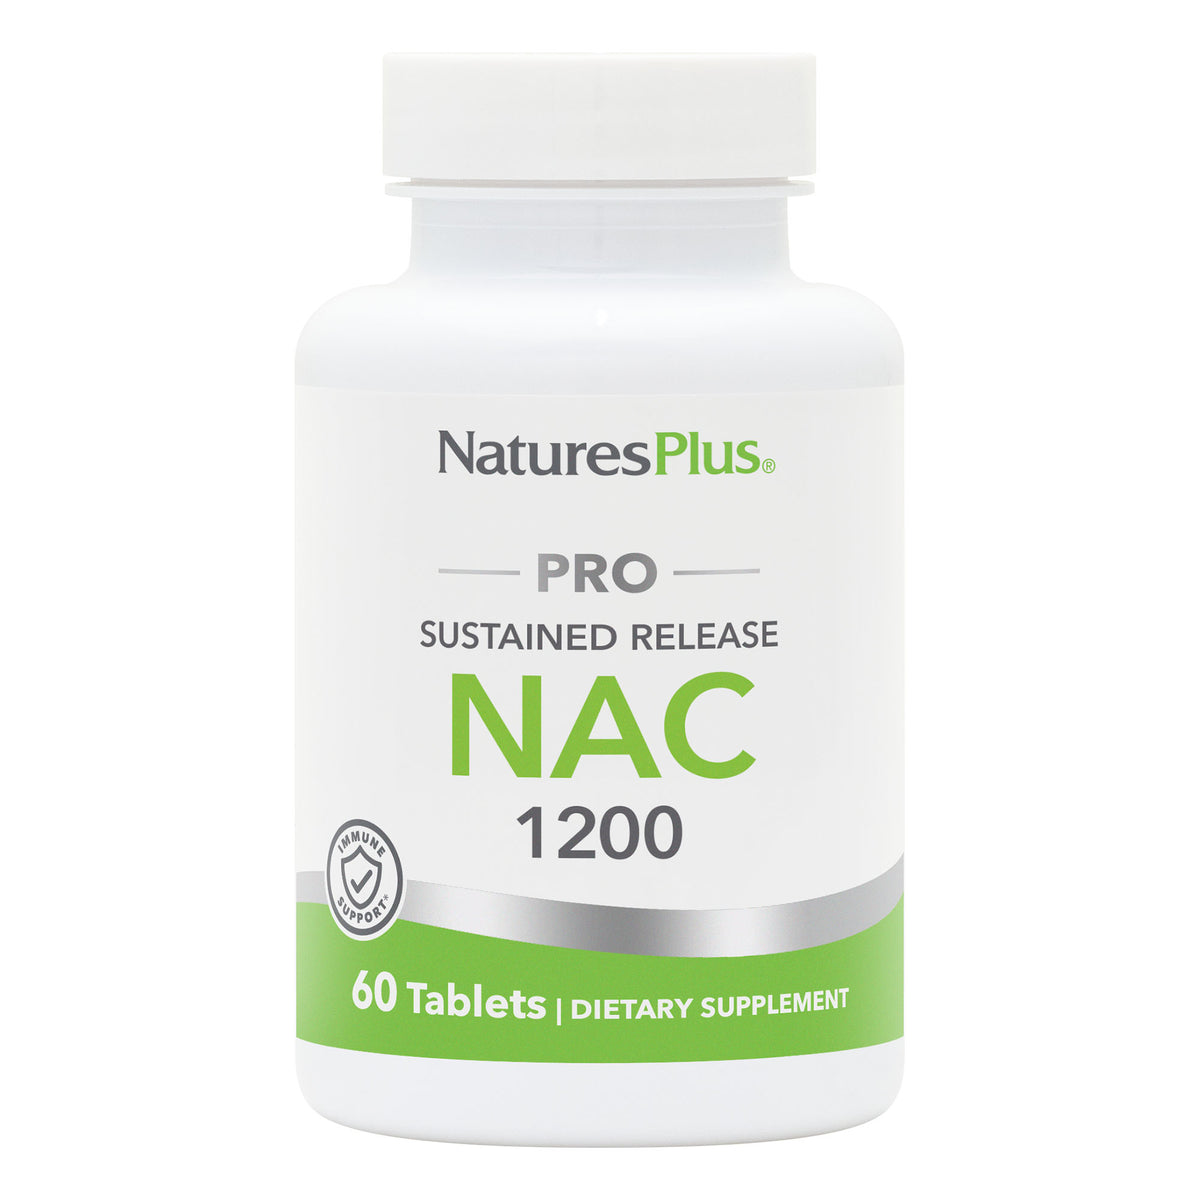 product image of NaturesPlus PRO NAC 1200 Tablets containing 60 Count